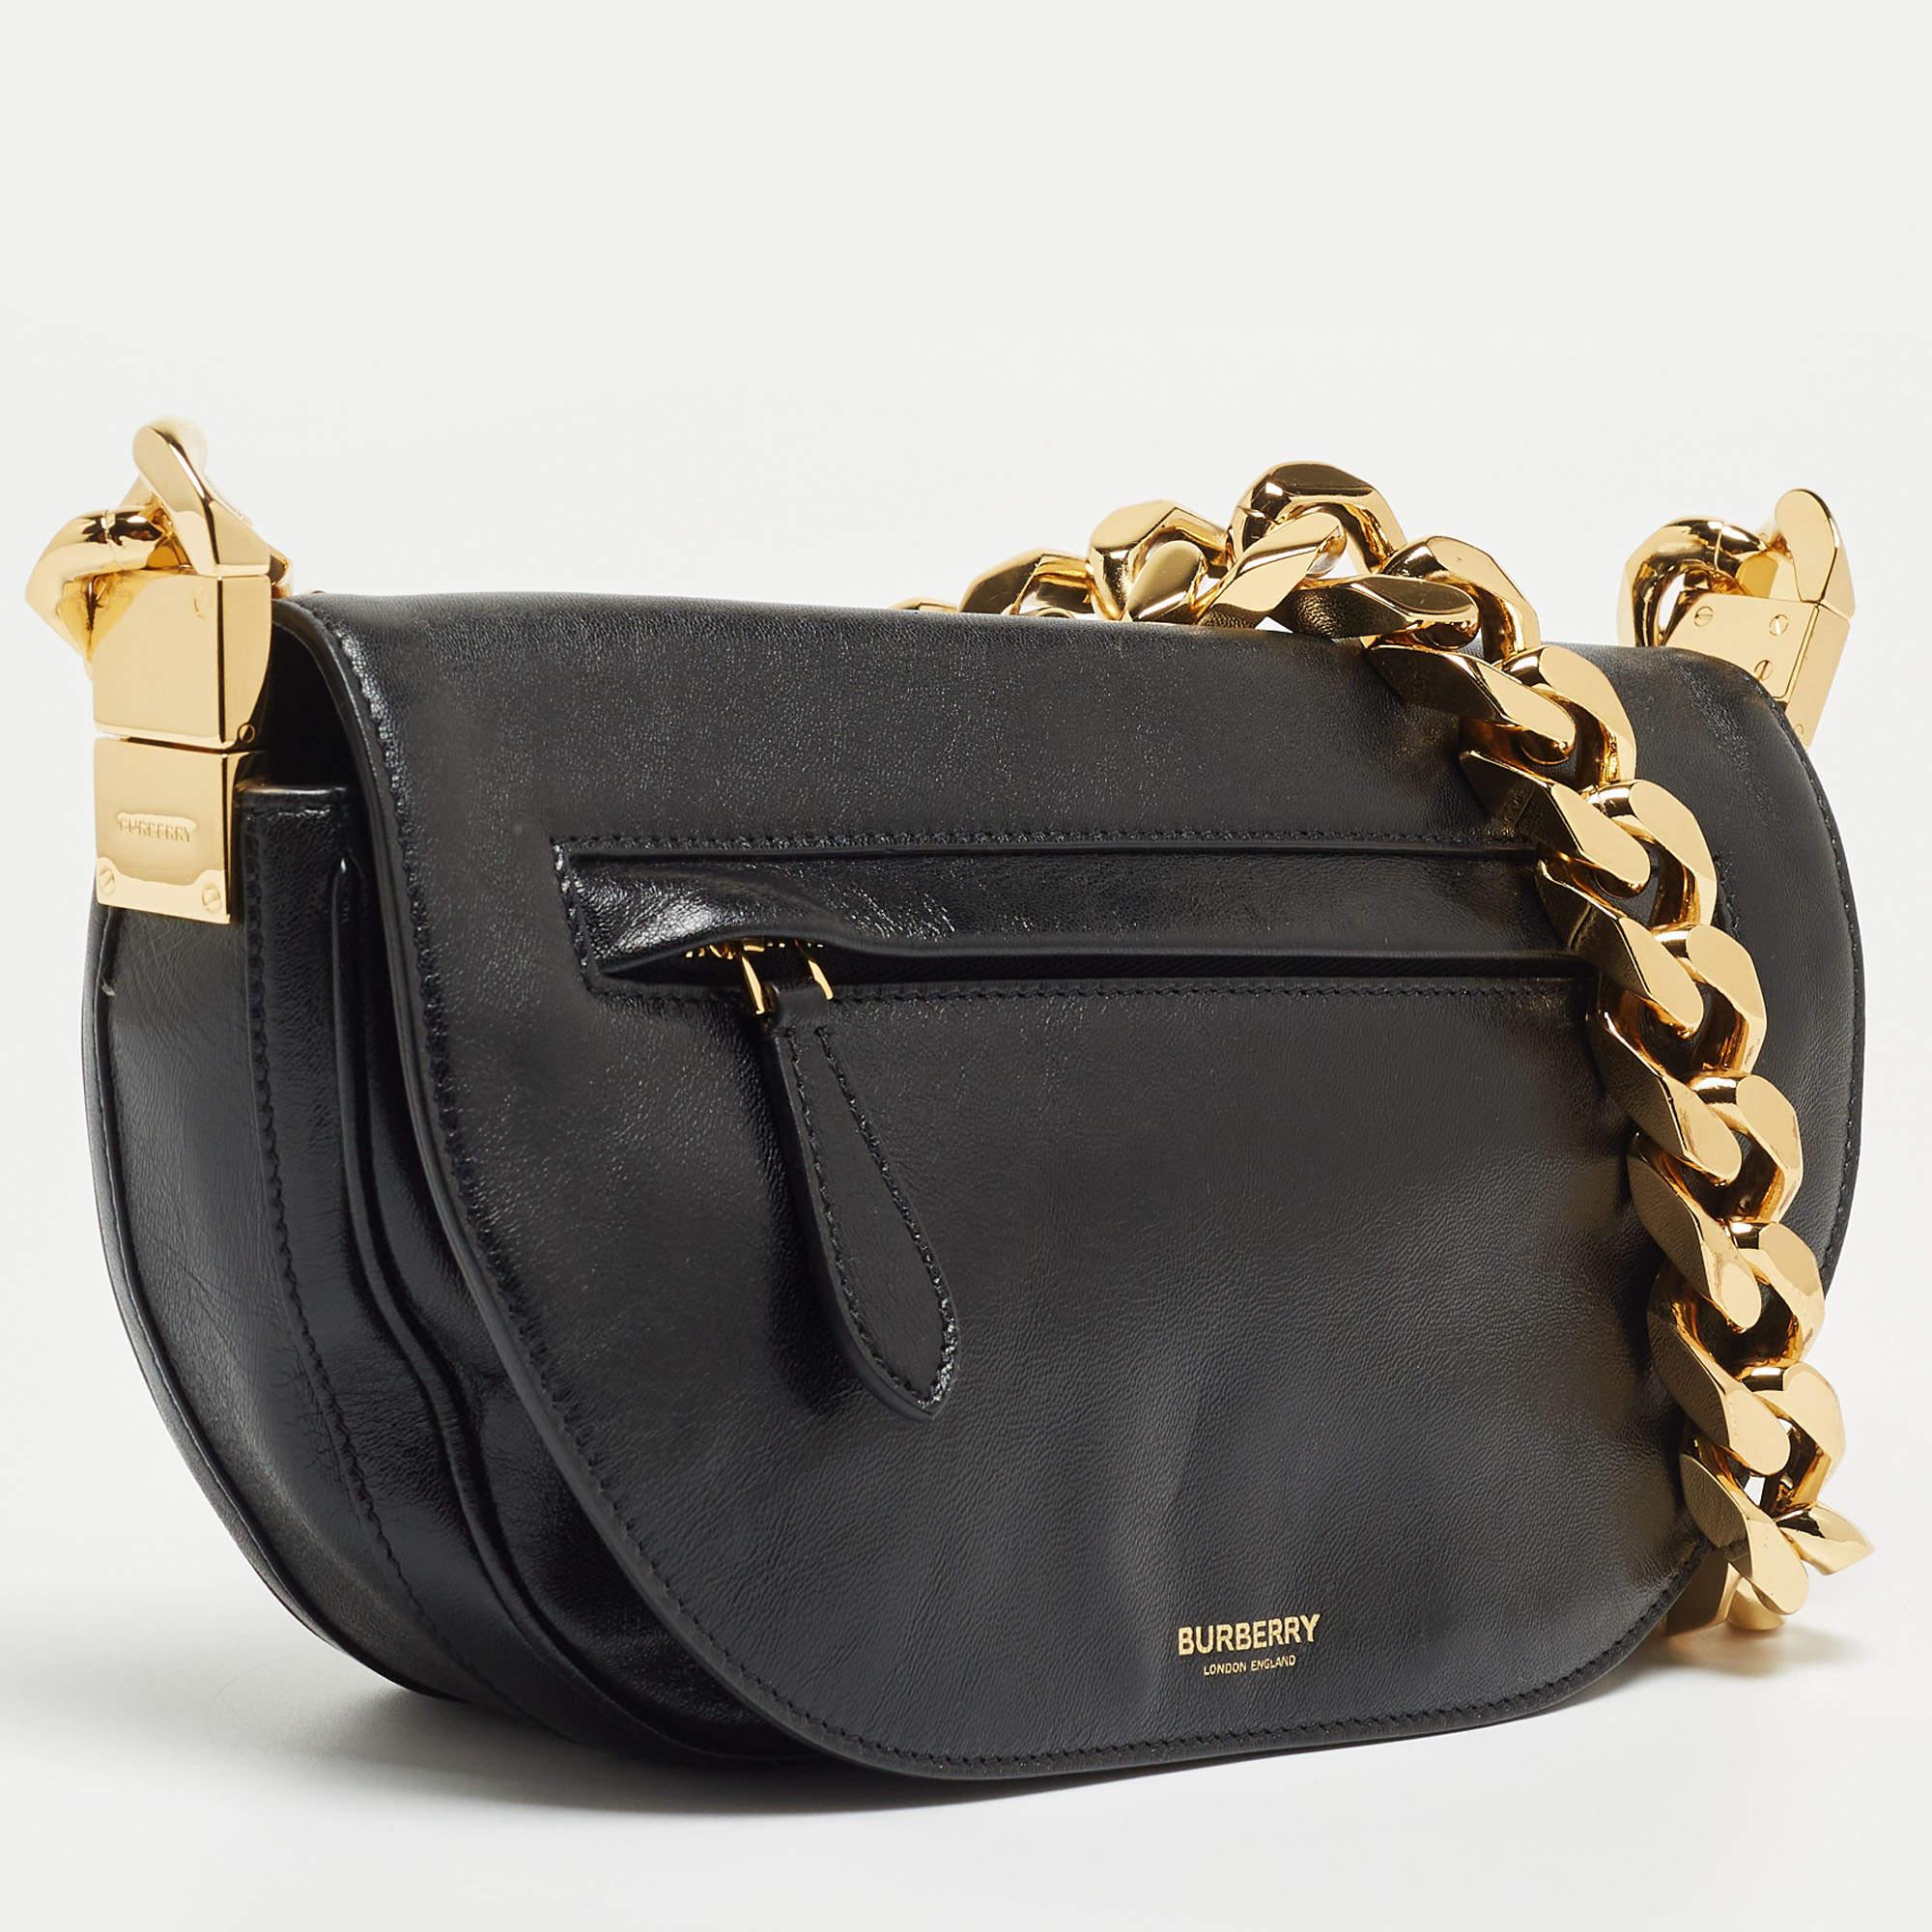 With an architectural shape, this Burberry Olympia bag resembles the crescent moon. The brand signature on the front lends to its instant identification, and it can be carried conveniently with a shoulder strap. Capturing the essence of feminity, it